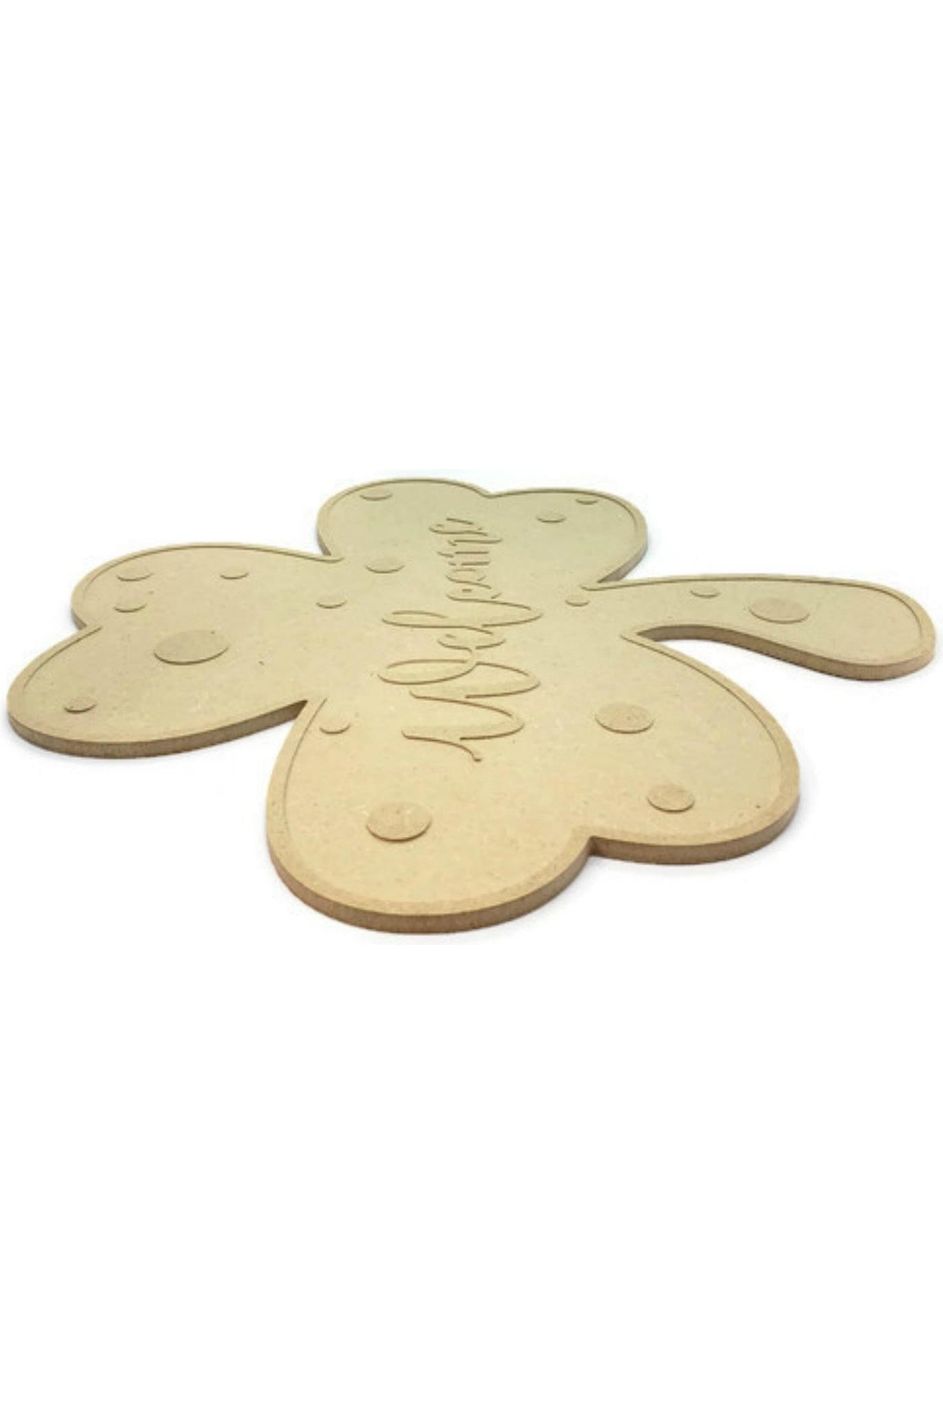 Shop For 14" Unpainted MDF Clover Welcome Sign